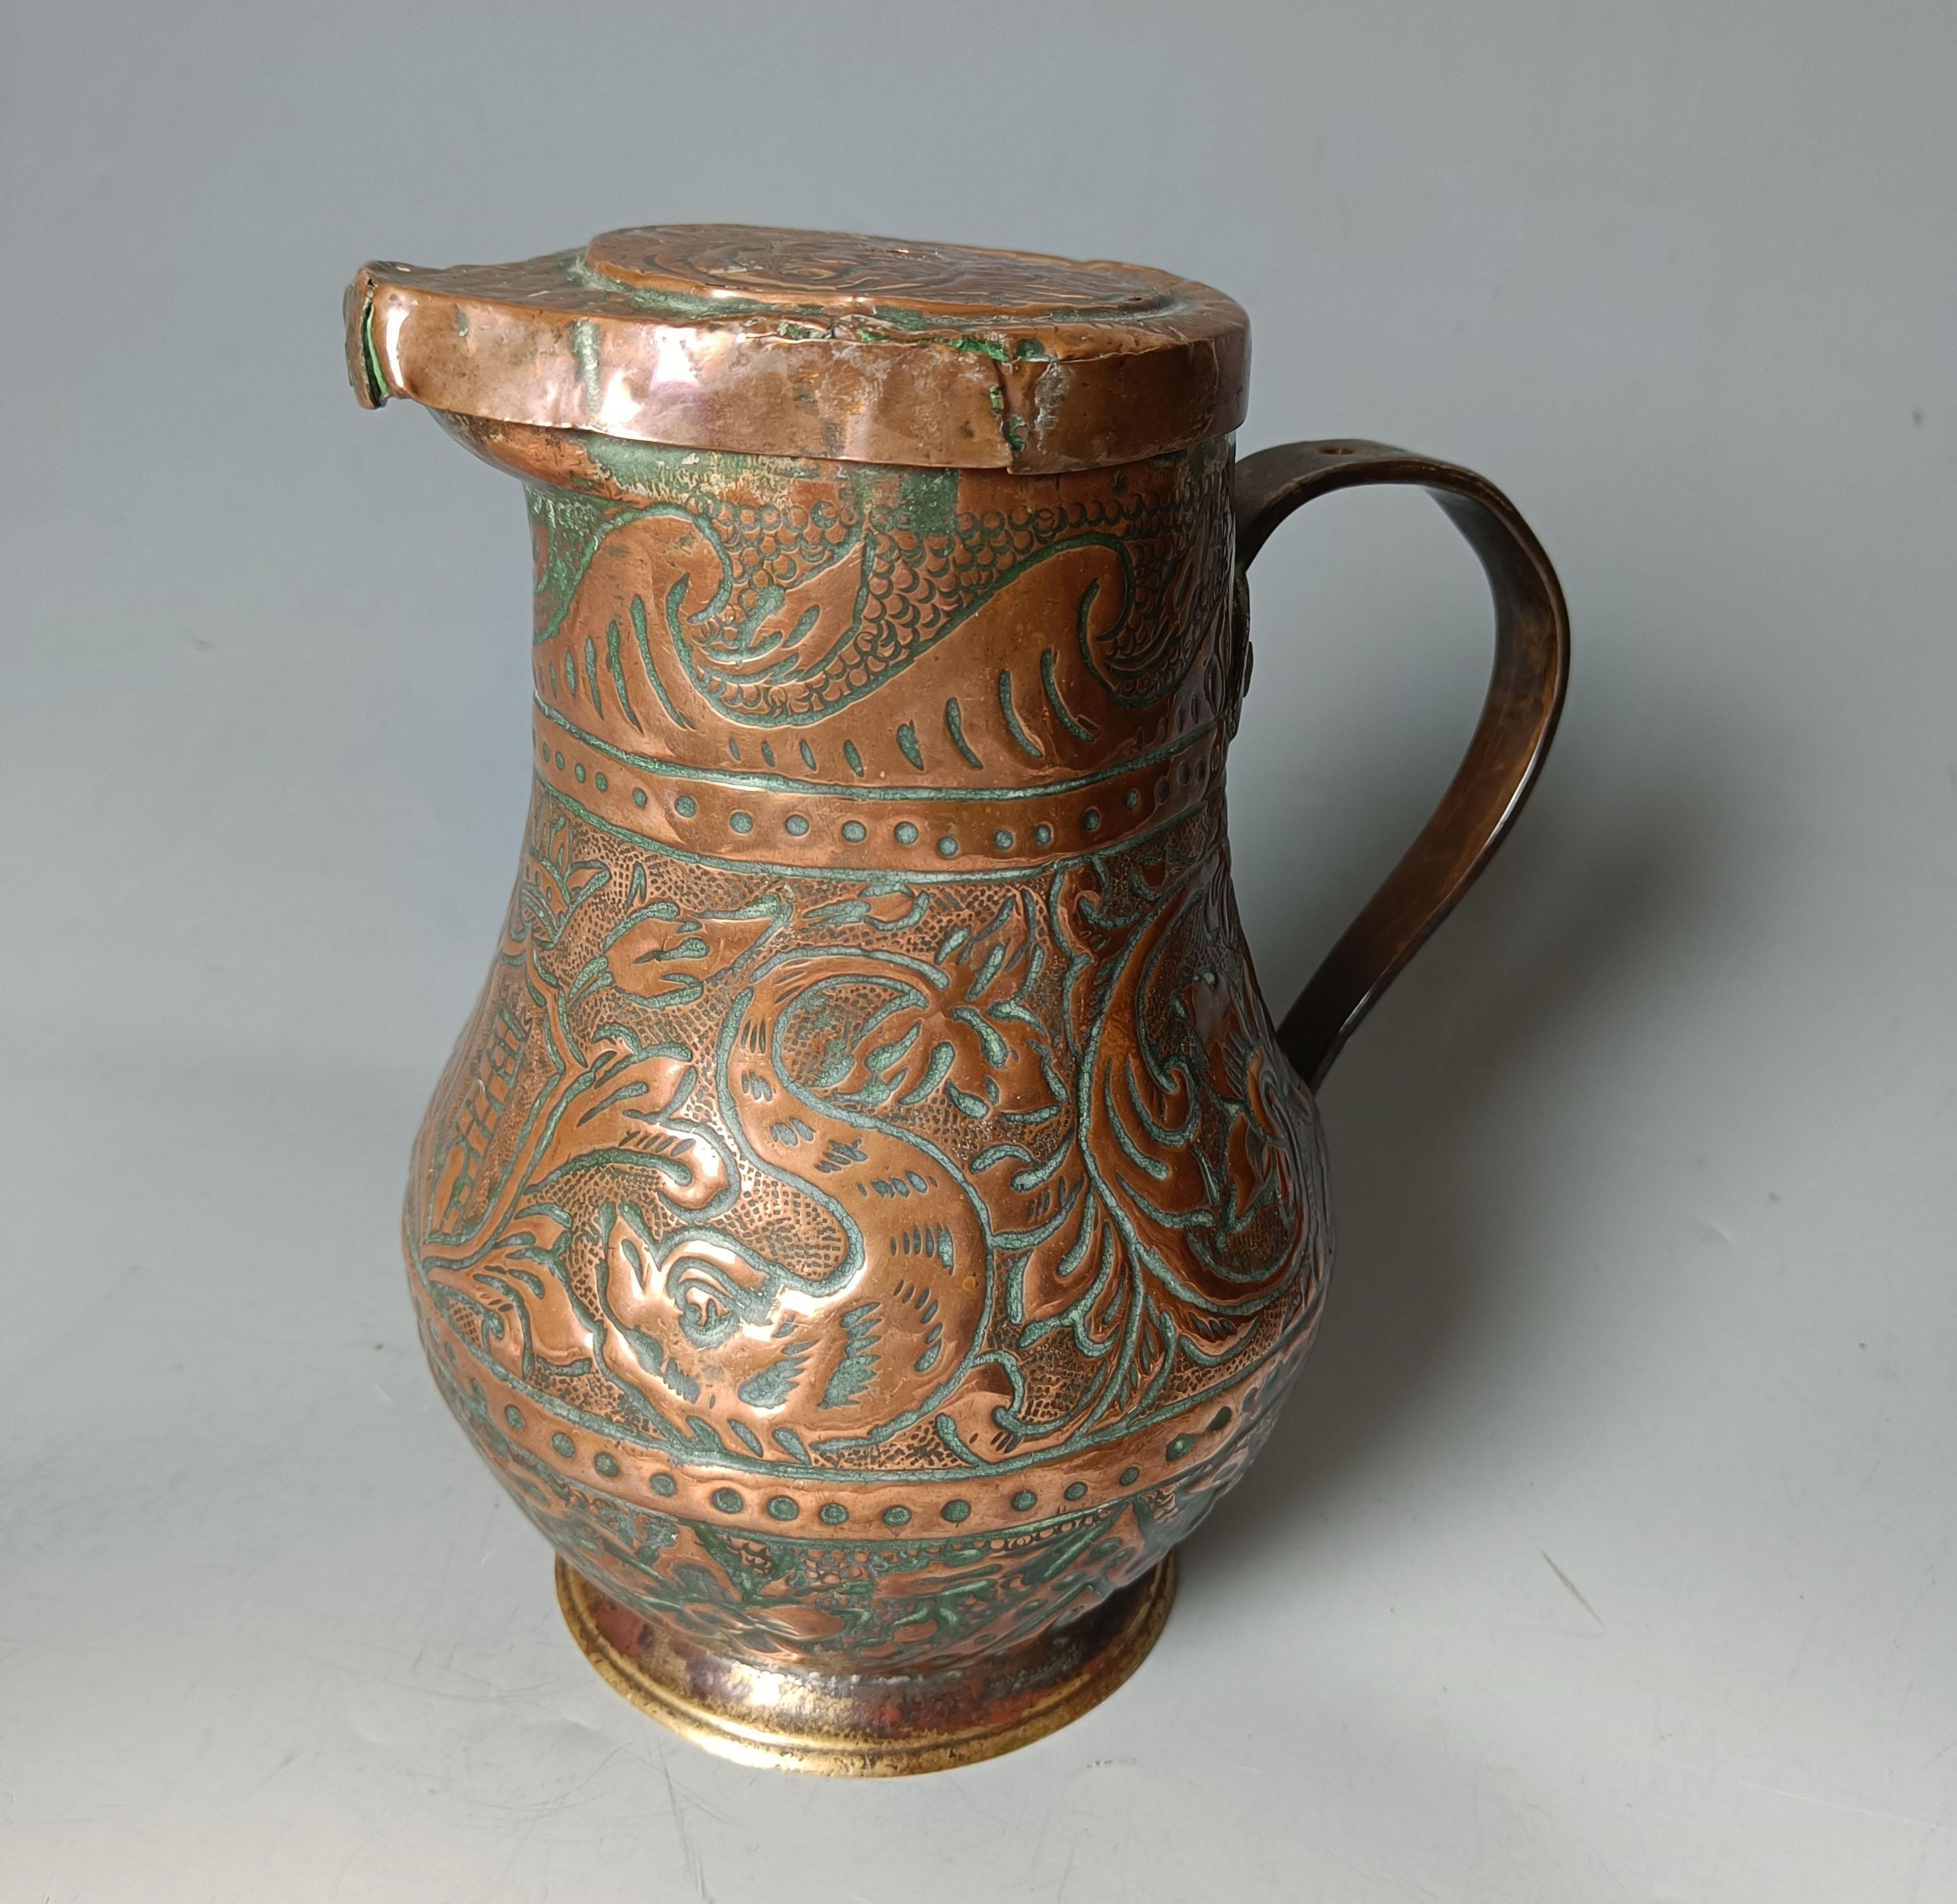 Antique Italian Copper Wine pitcher 18th Century Venetian Venice European  



A fine example of Italian copperwork from the 1700s, with fine embossed decoration including Fish, Leaves and scrollwork.
Height 8 inches 20 cm
condition: minor damage to